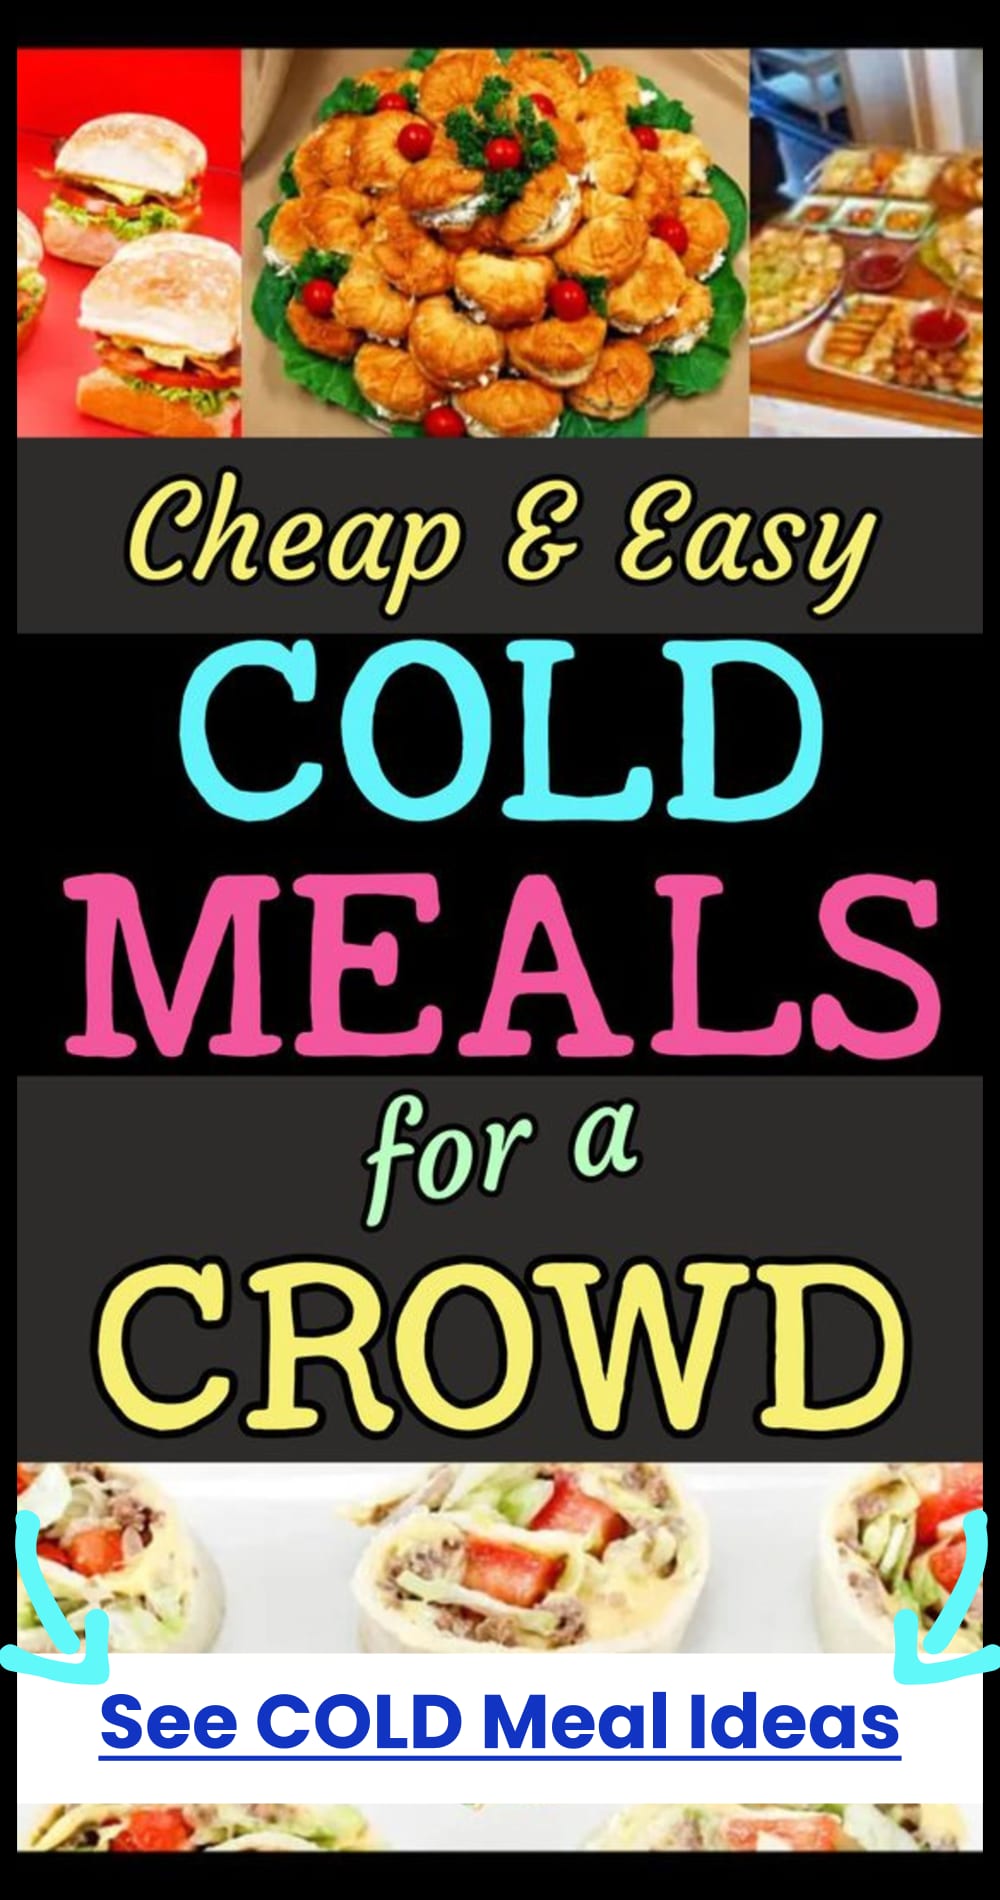 Easy COLD meals for large groups at a church supper or dinner crowd